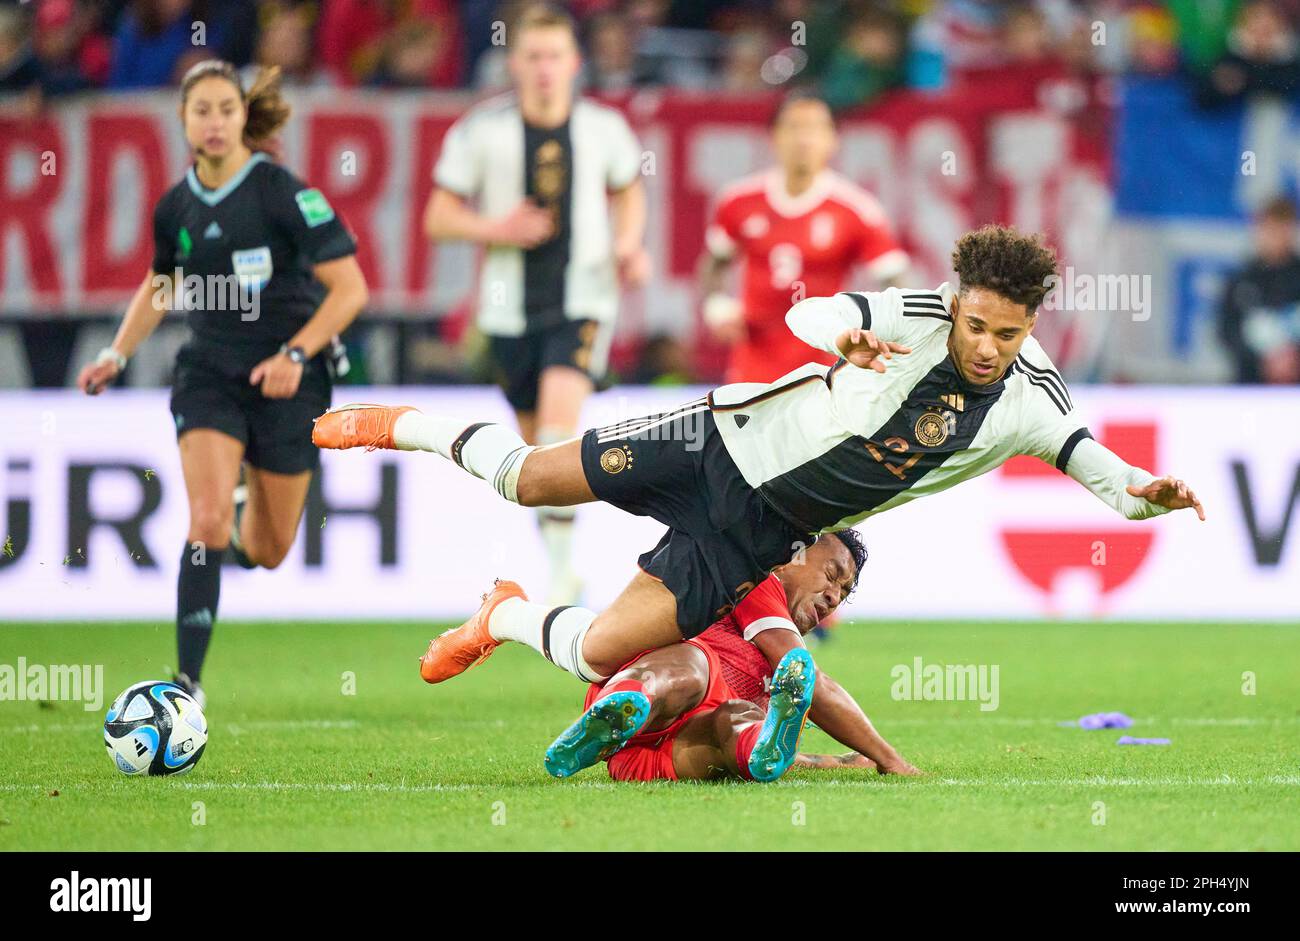 Kevin Schade, DFB 21  compete for the ball, tackling, duel, header, zweikampf, action, fight against Renato Tapia, Peru 13  in the friendly match GERMANY - PERU 2-0 Preparation for European Championships 2024 in Germany ,Season 2022/2023, on Mar 25, 2023  in Mainz, Germany.  © Peter Schatz / Alamy Live News Stock Photo